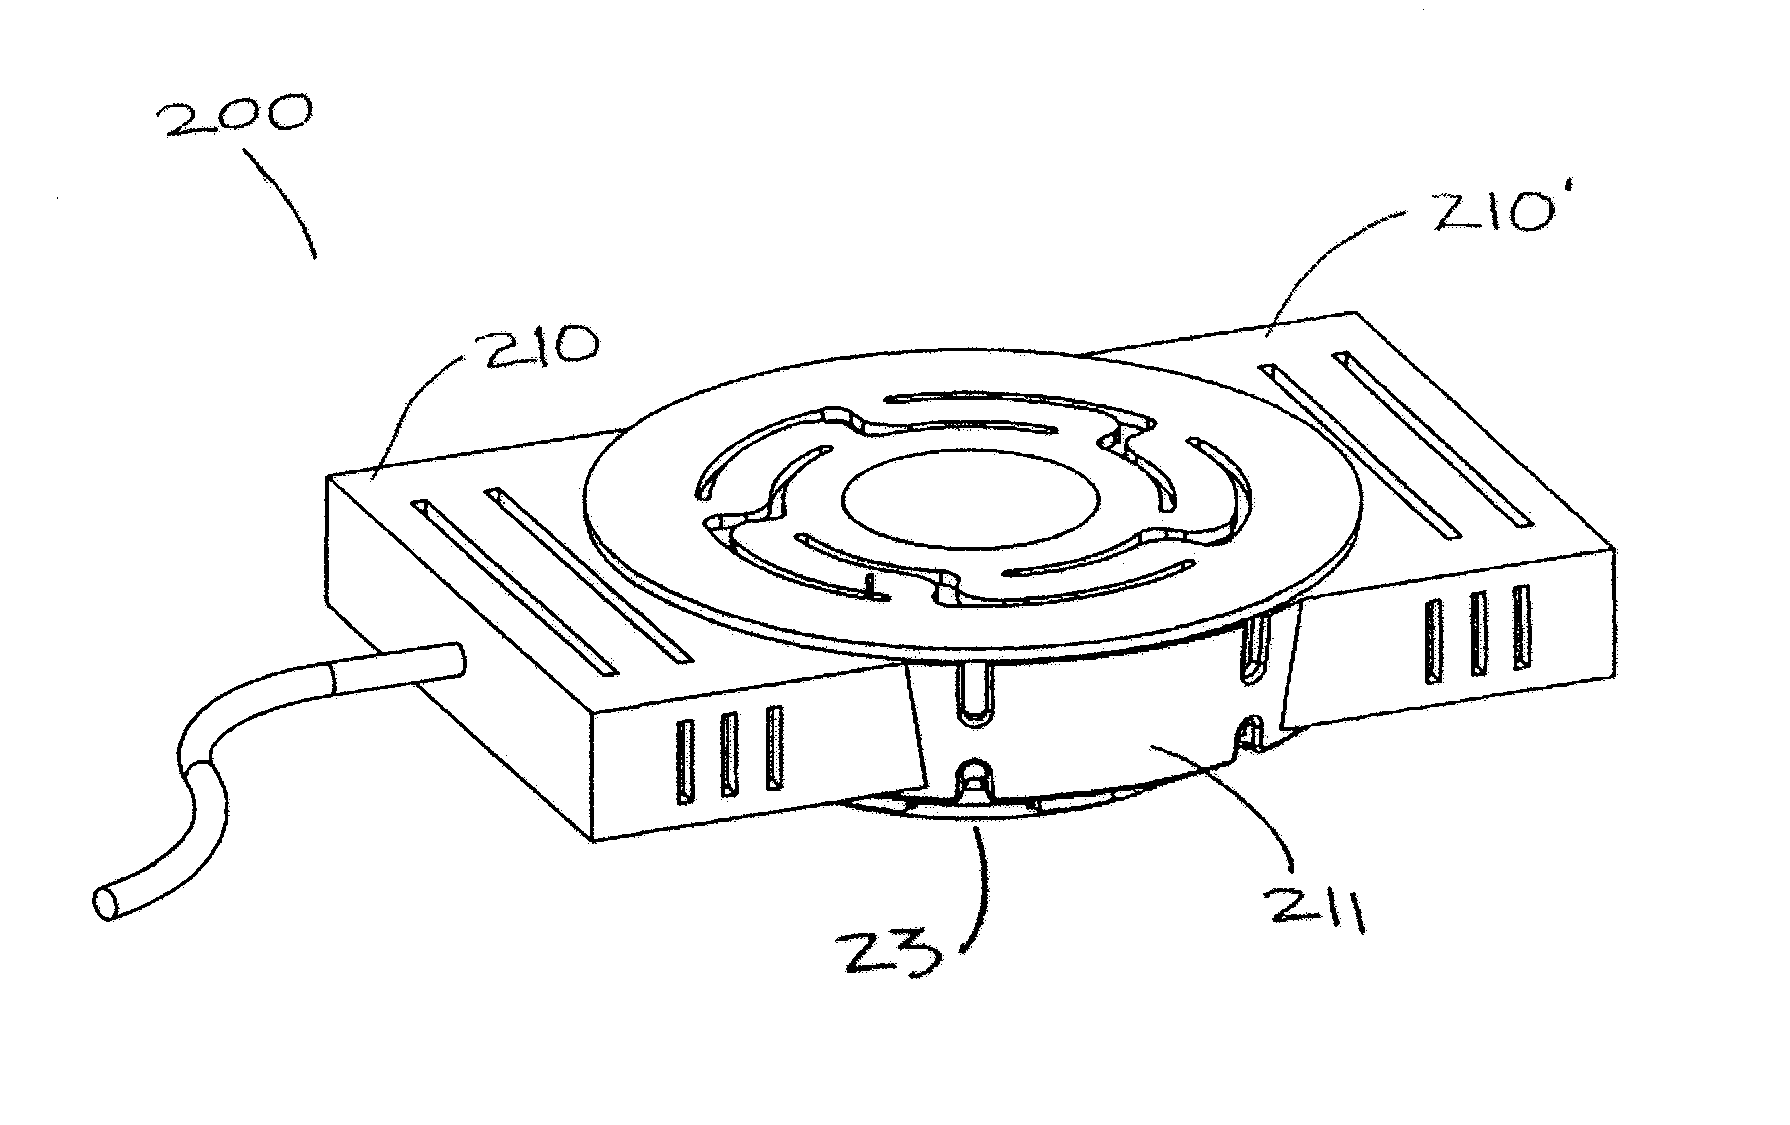  inertial type acoustic transducer